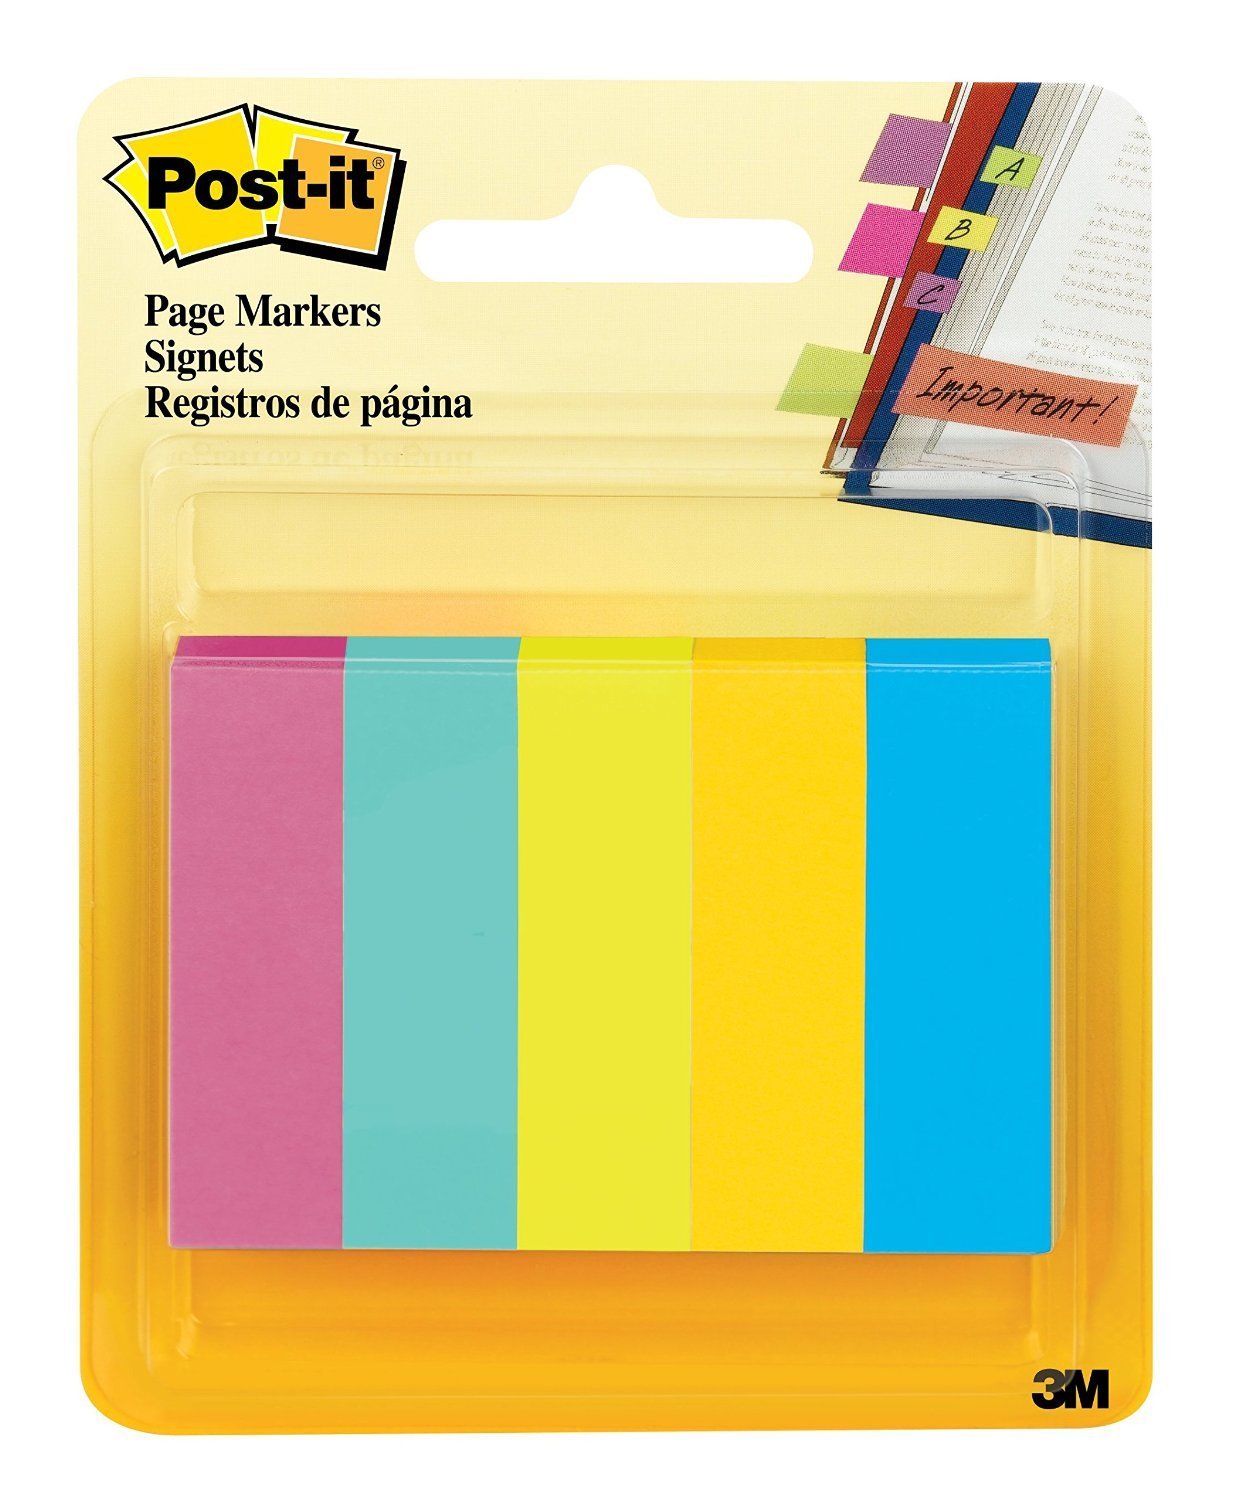 3M-670-5AF PAGE MARKERS FLUO COLORS -0.6″ X 2″ 5 PADS/PACK – 50 SHEET EACH